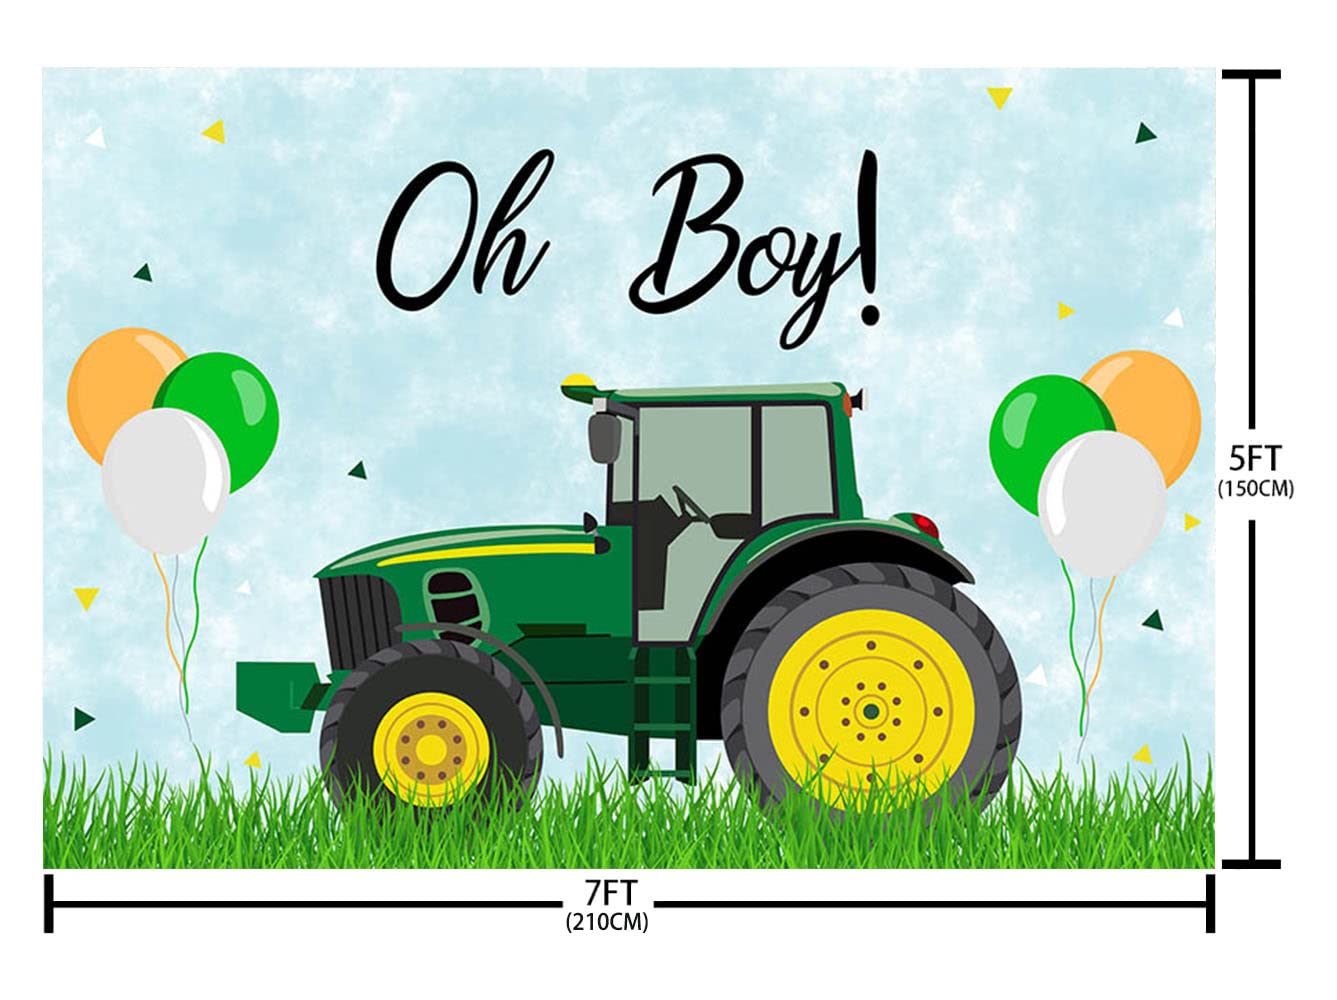 ABLIN 7x5ft Tractor Baby Shower Backdrop for Boy Oh Boy CQ233 0